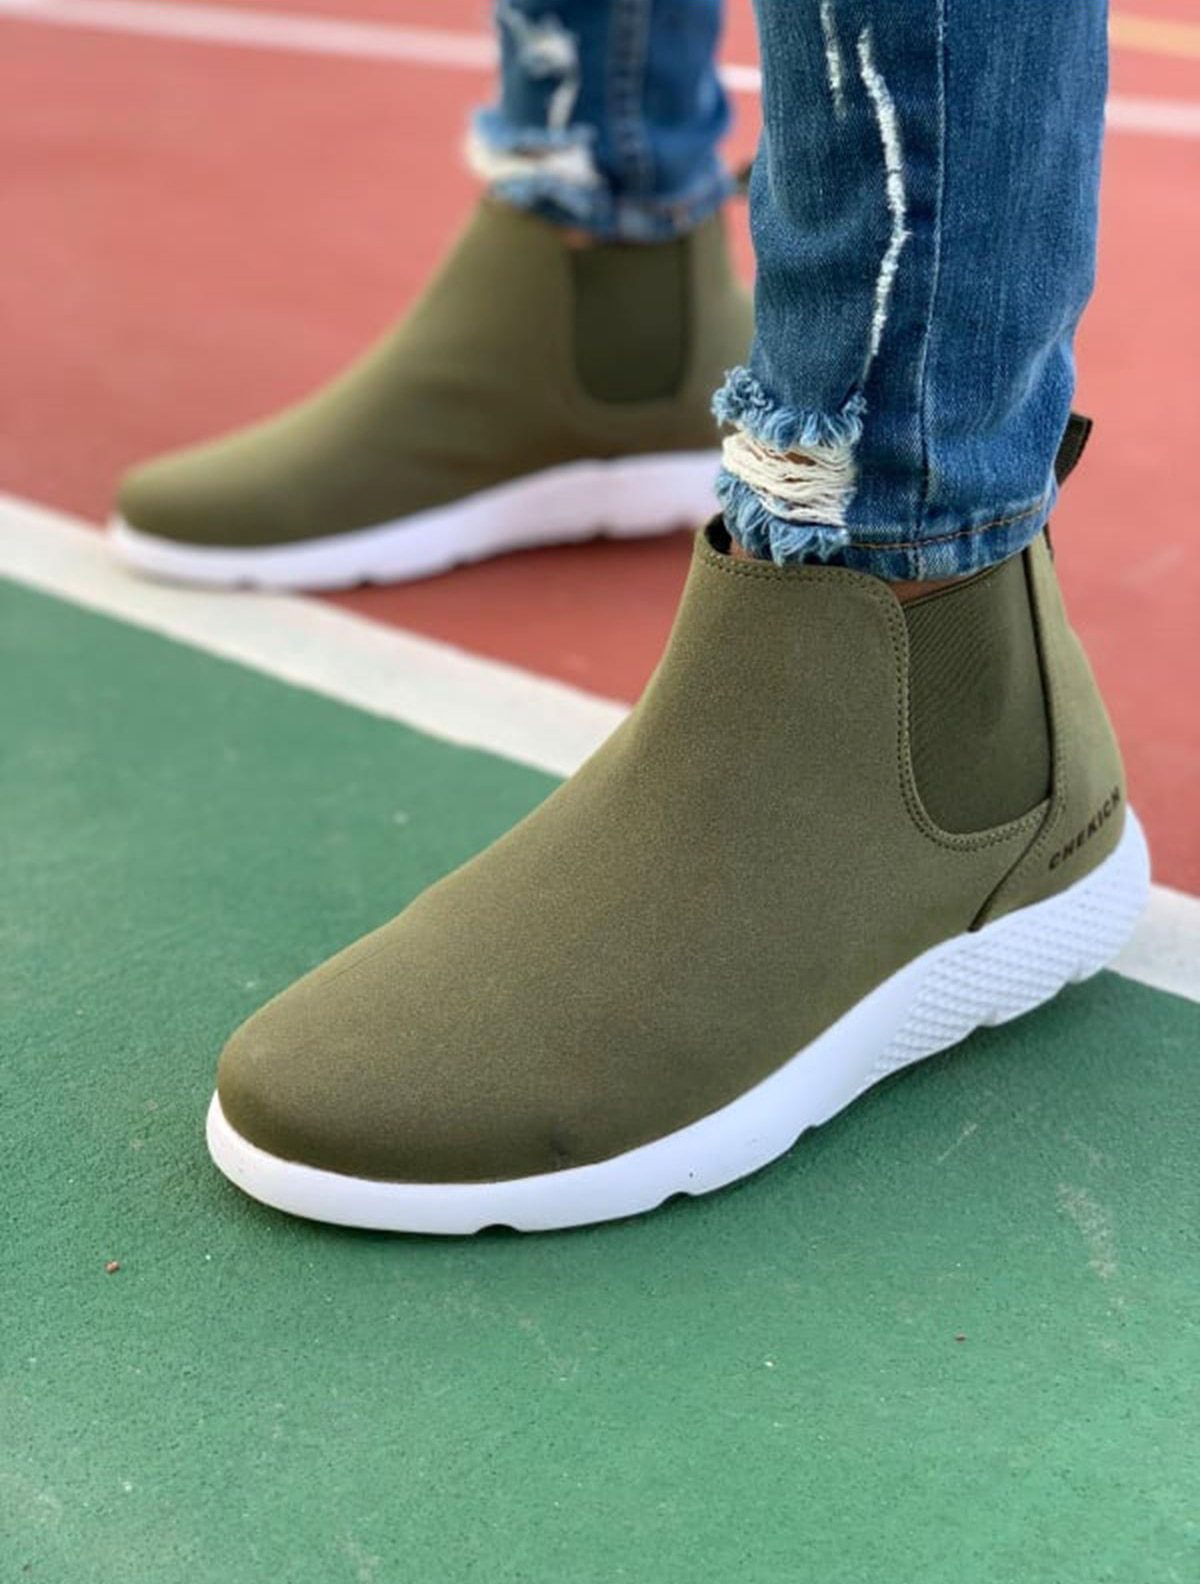 Chekich Men's Boots Khaki Color Artificial Leather 2021 Spring and Autumn Seasons Chelsea Shoes Slip On Sneakers Green Wedding Business Office Flat Sewing Comfortable White Base Flexible Outdoor Camping Nature CH049 V4